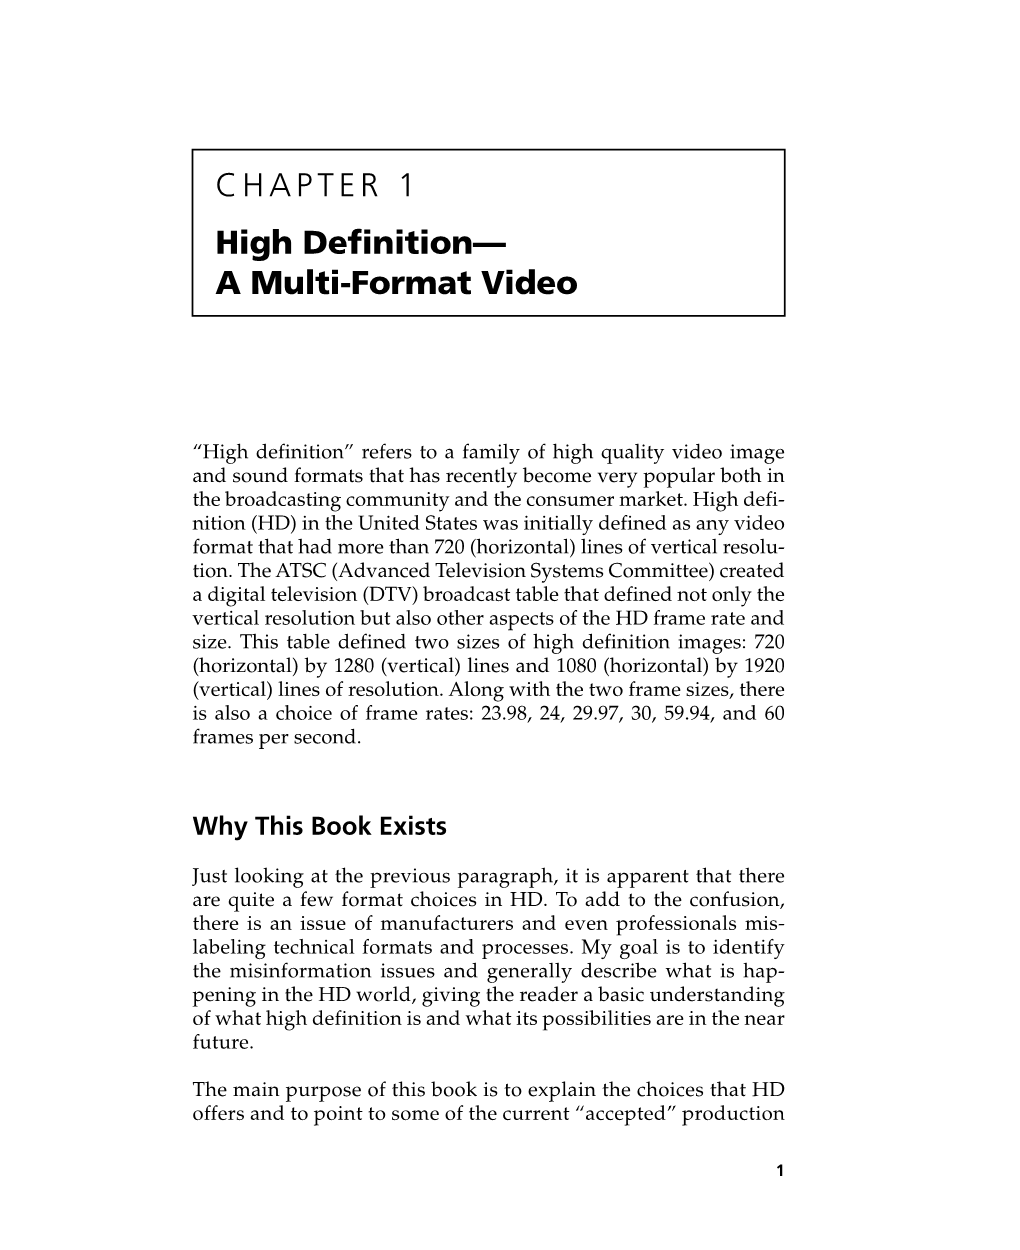 CHAPTER 1 High Definition— a Multi-Format Video